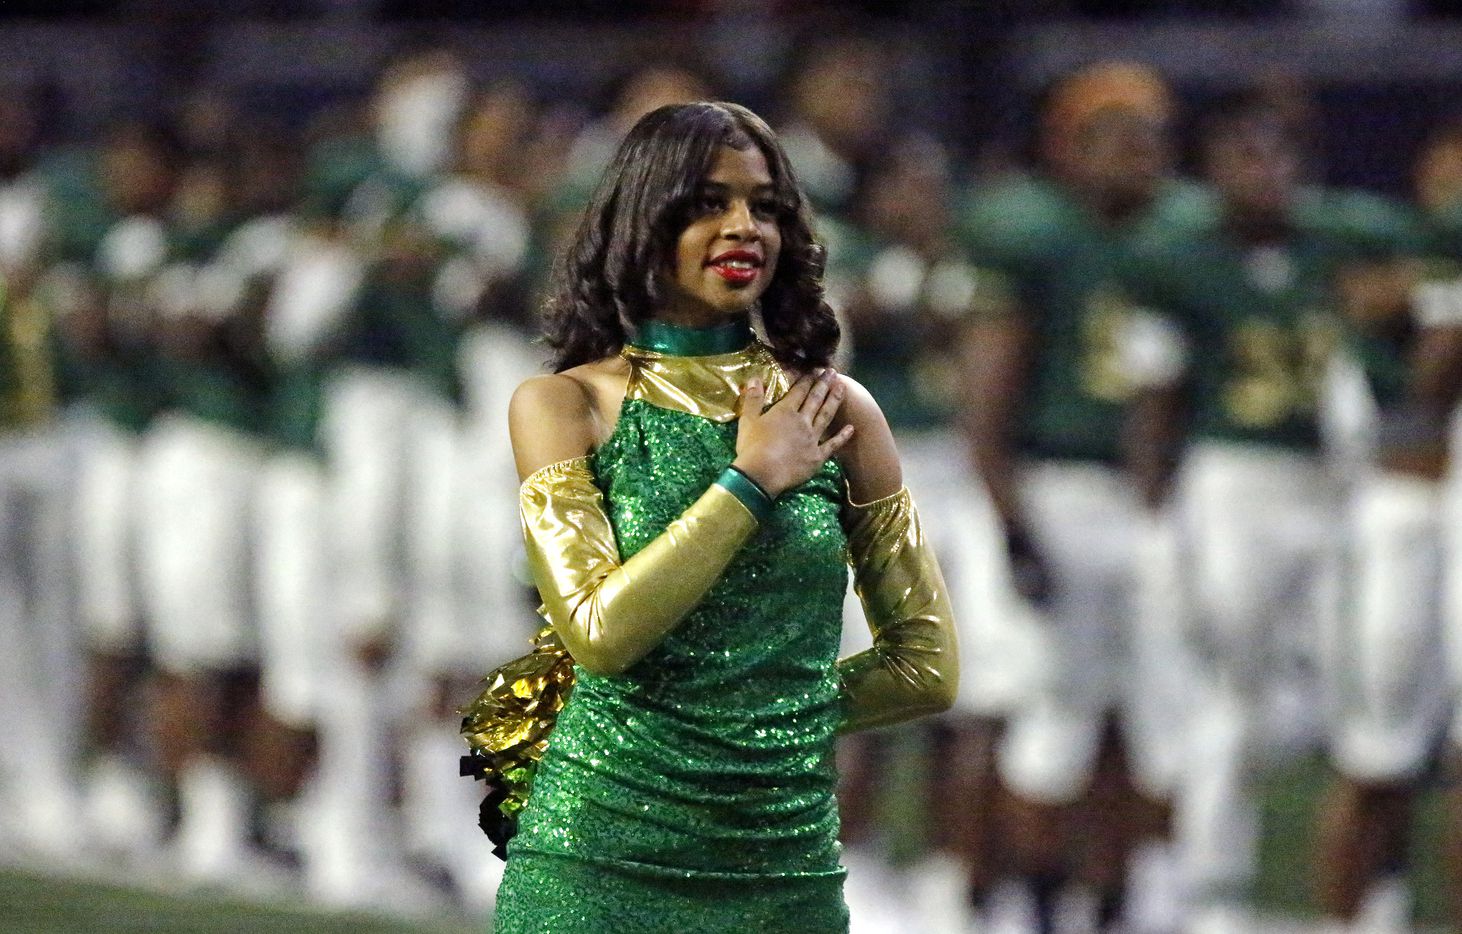 DeSoto Eaglette Kandace White stands at attention for the national anthem before kickoff as DeSoto High School played Duncanville High School in the Class 6A Division I Region II final playoff game at the Ford Center in Frisco on Saturday, December 4, 2021. (Stewart F. House/Special Contributor)